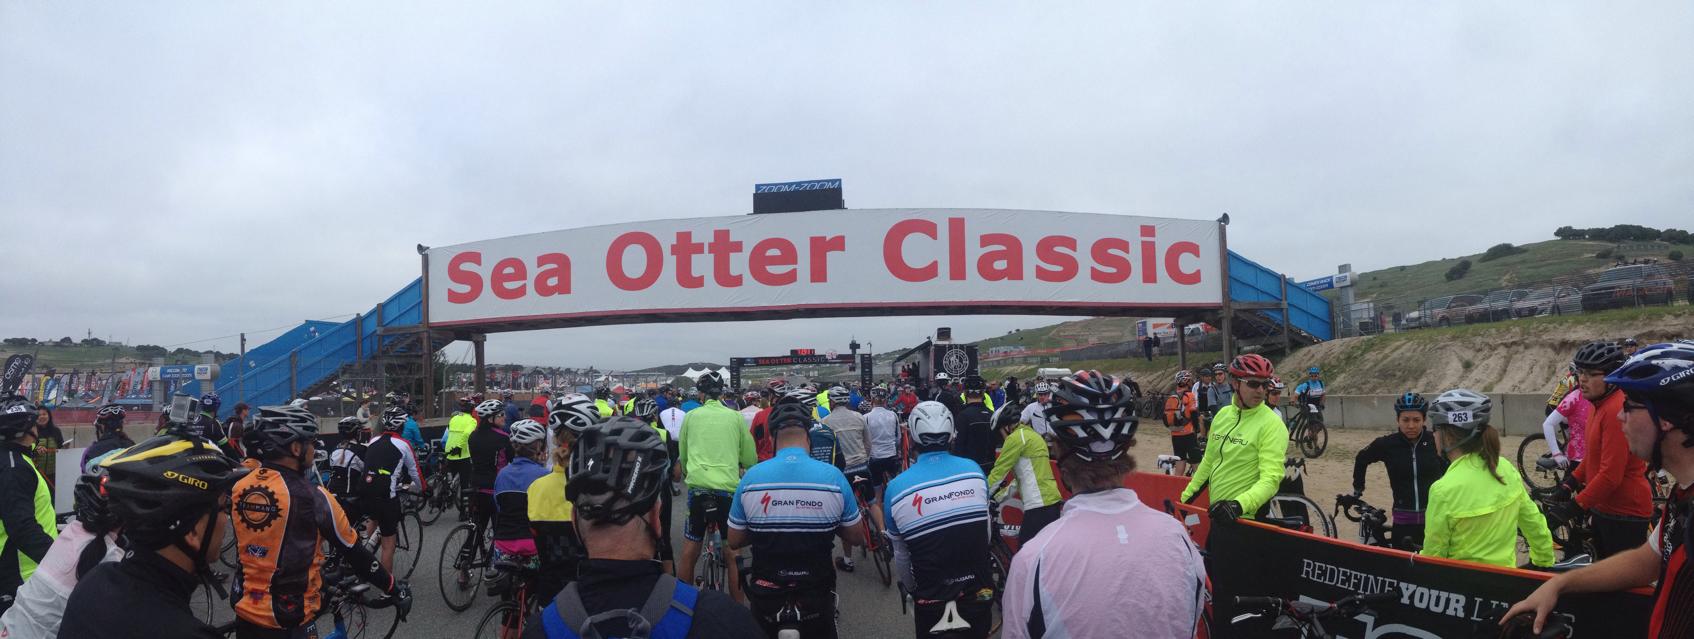 Sea Otter Classic: A Spring Festival Of Bicycles, Racing And Fun